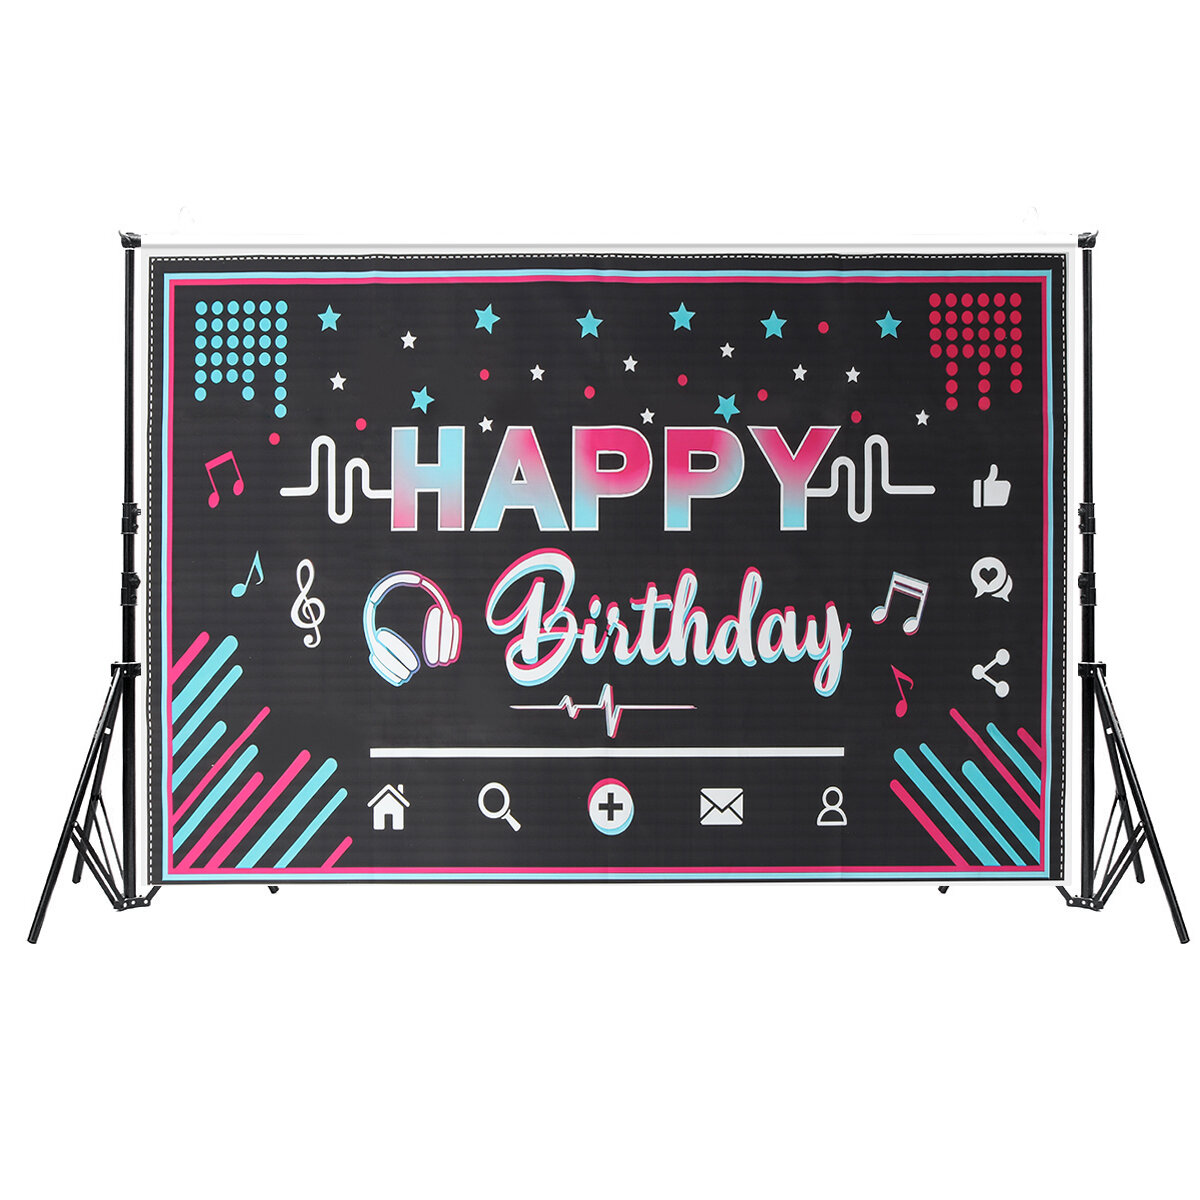 Happy Birthday Party Backdrop Fabric Music Party Background Photography Prop Supplies